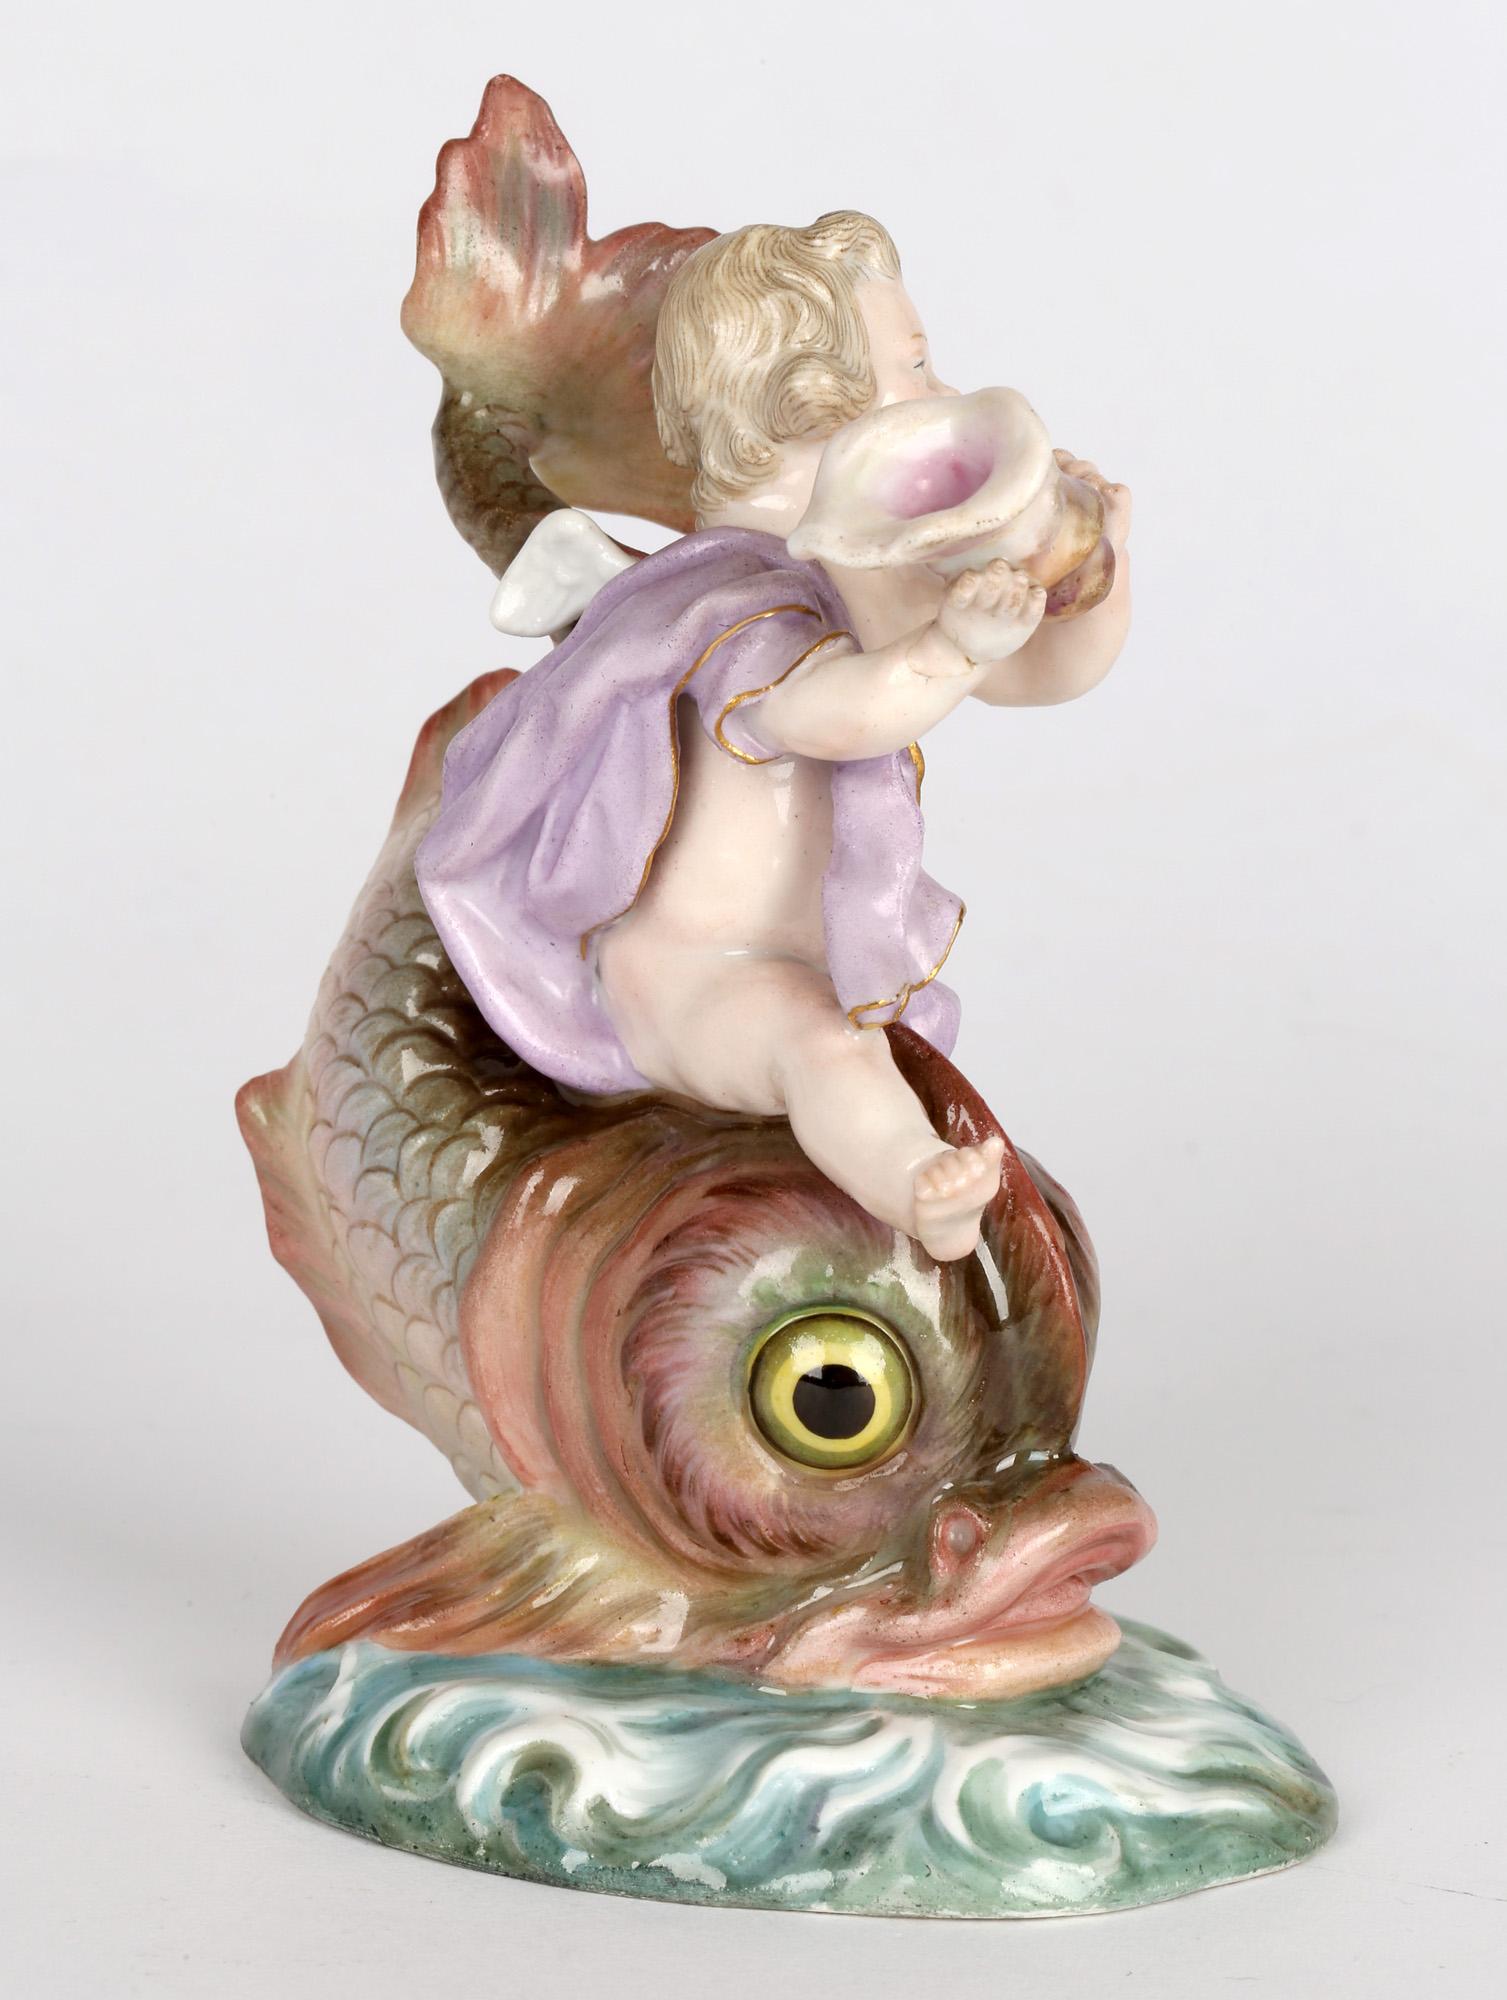 A rare and delightful German porcelain figure of a winged cherub playing a shell horn and riding on the back of a large fish dating we believe from the 19th century. This wonderful example is mounted on a large oval shaped base molded with waves and